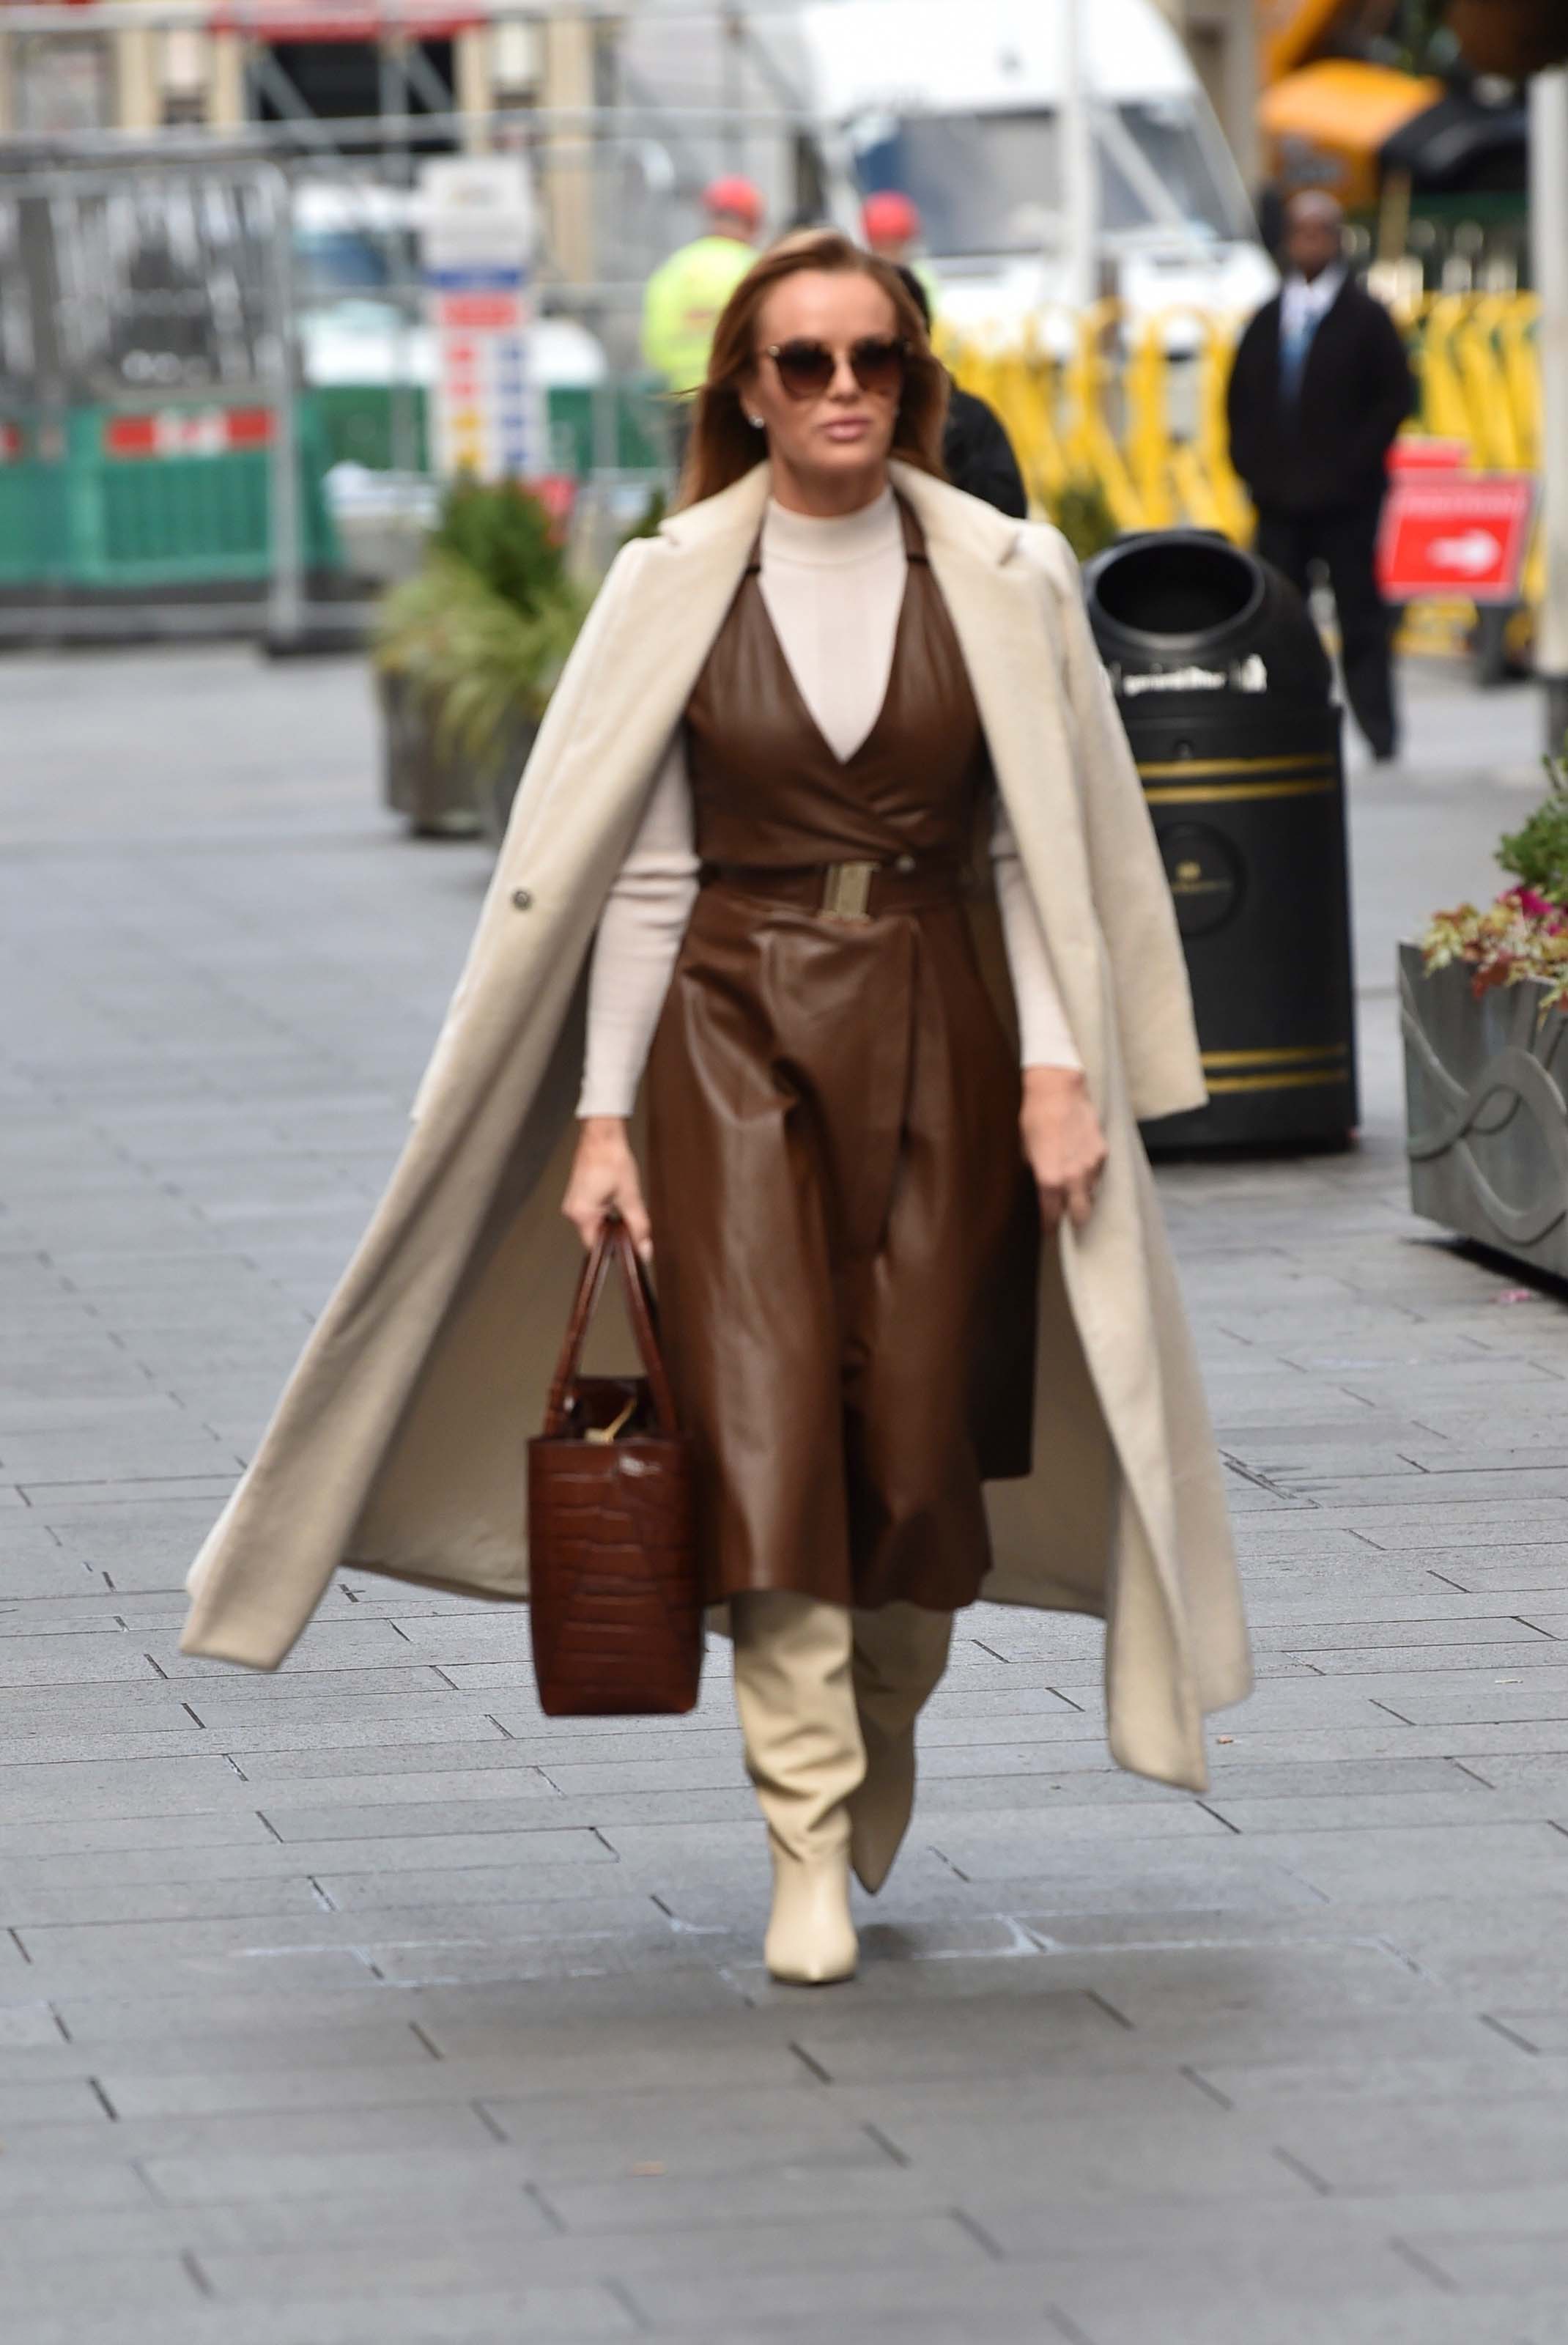 Amanda Holden seen at Global studios after the Heart Breakfast show in London